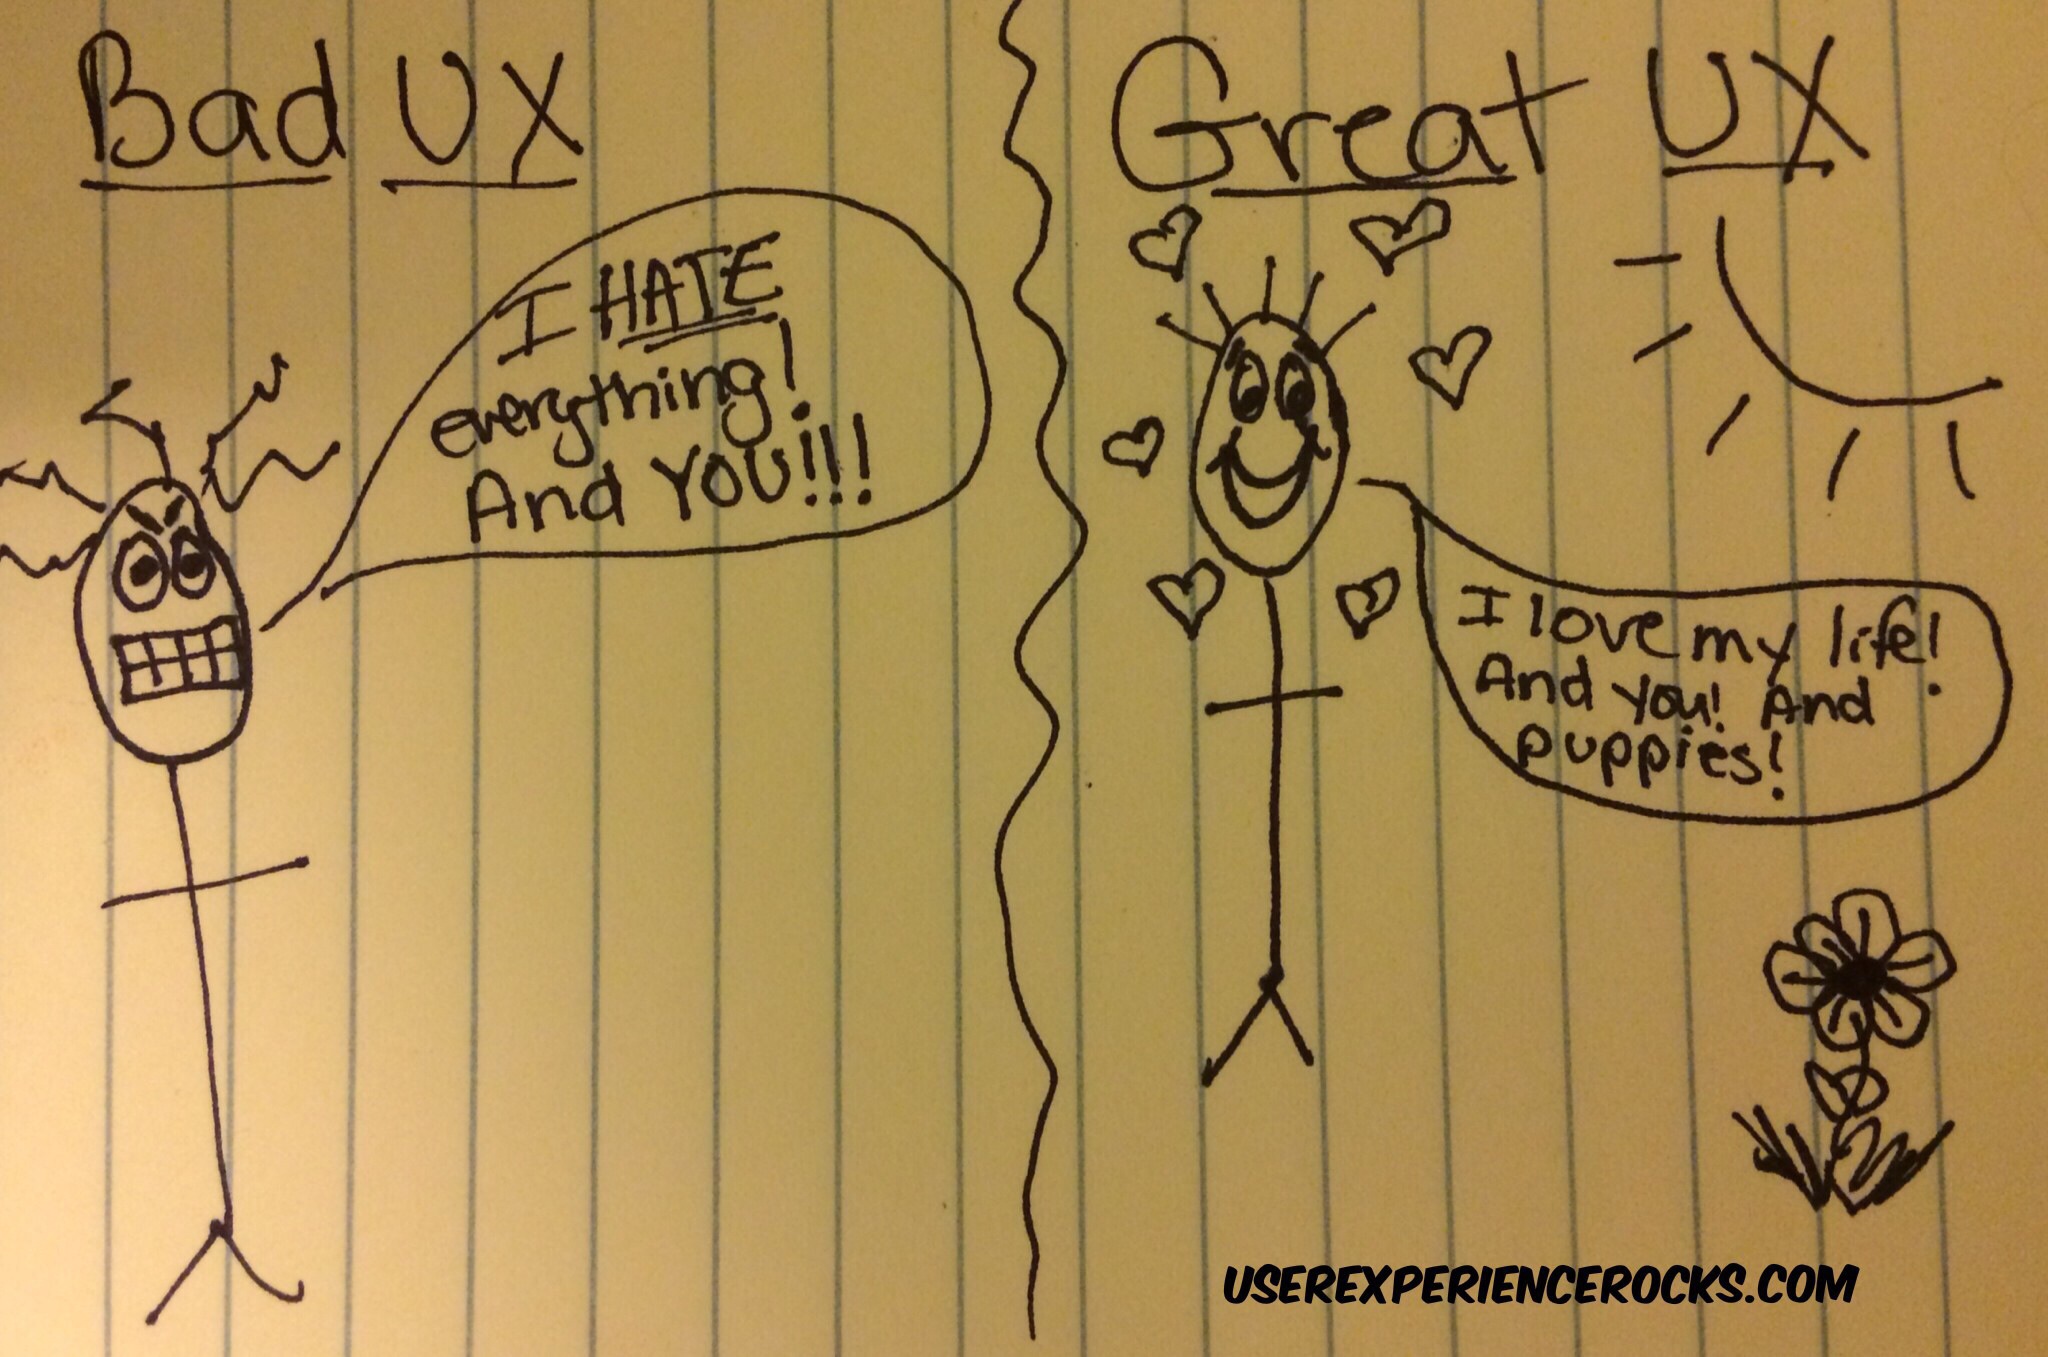 Bad UX (I hate everything and you!!) vs Great UX (love my life! And you! And puppies!)